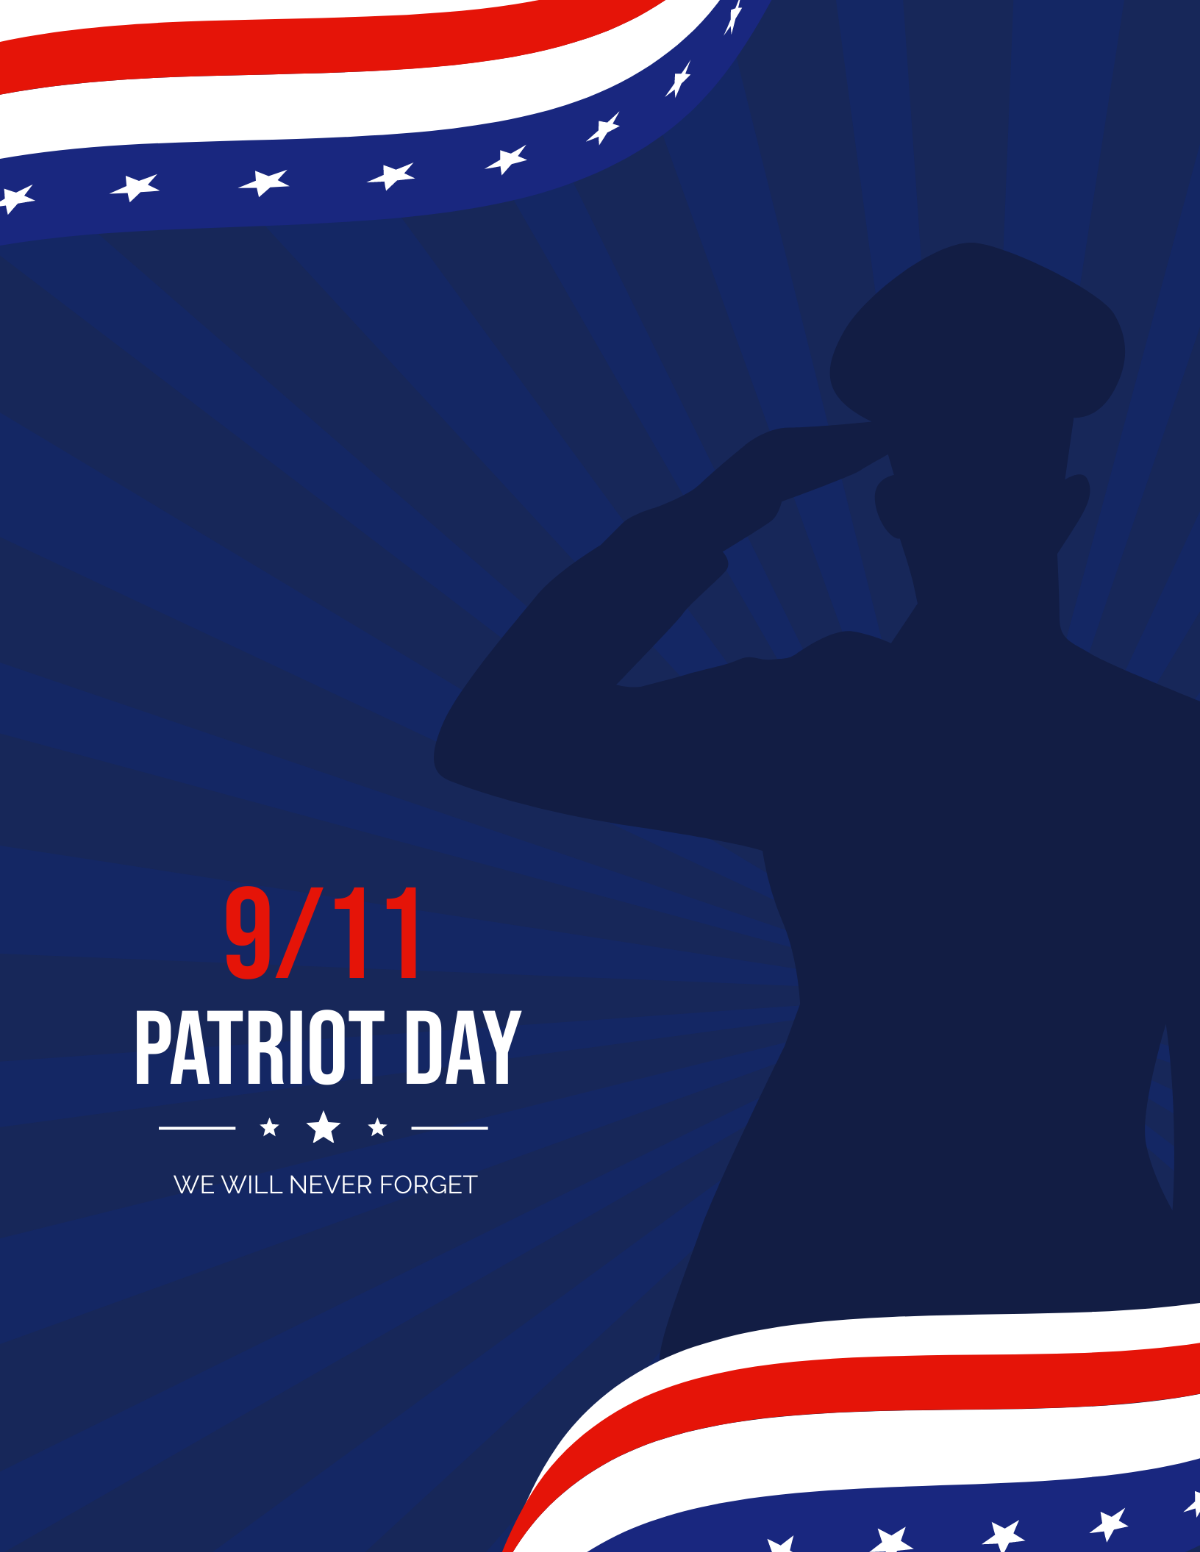 Free We Will Never Forget Patriot Day Flyer Template